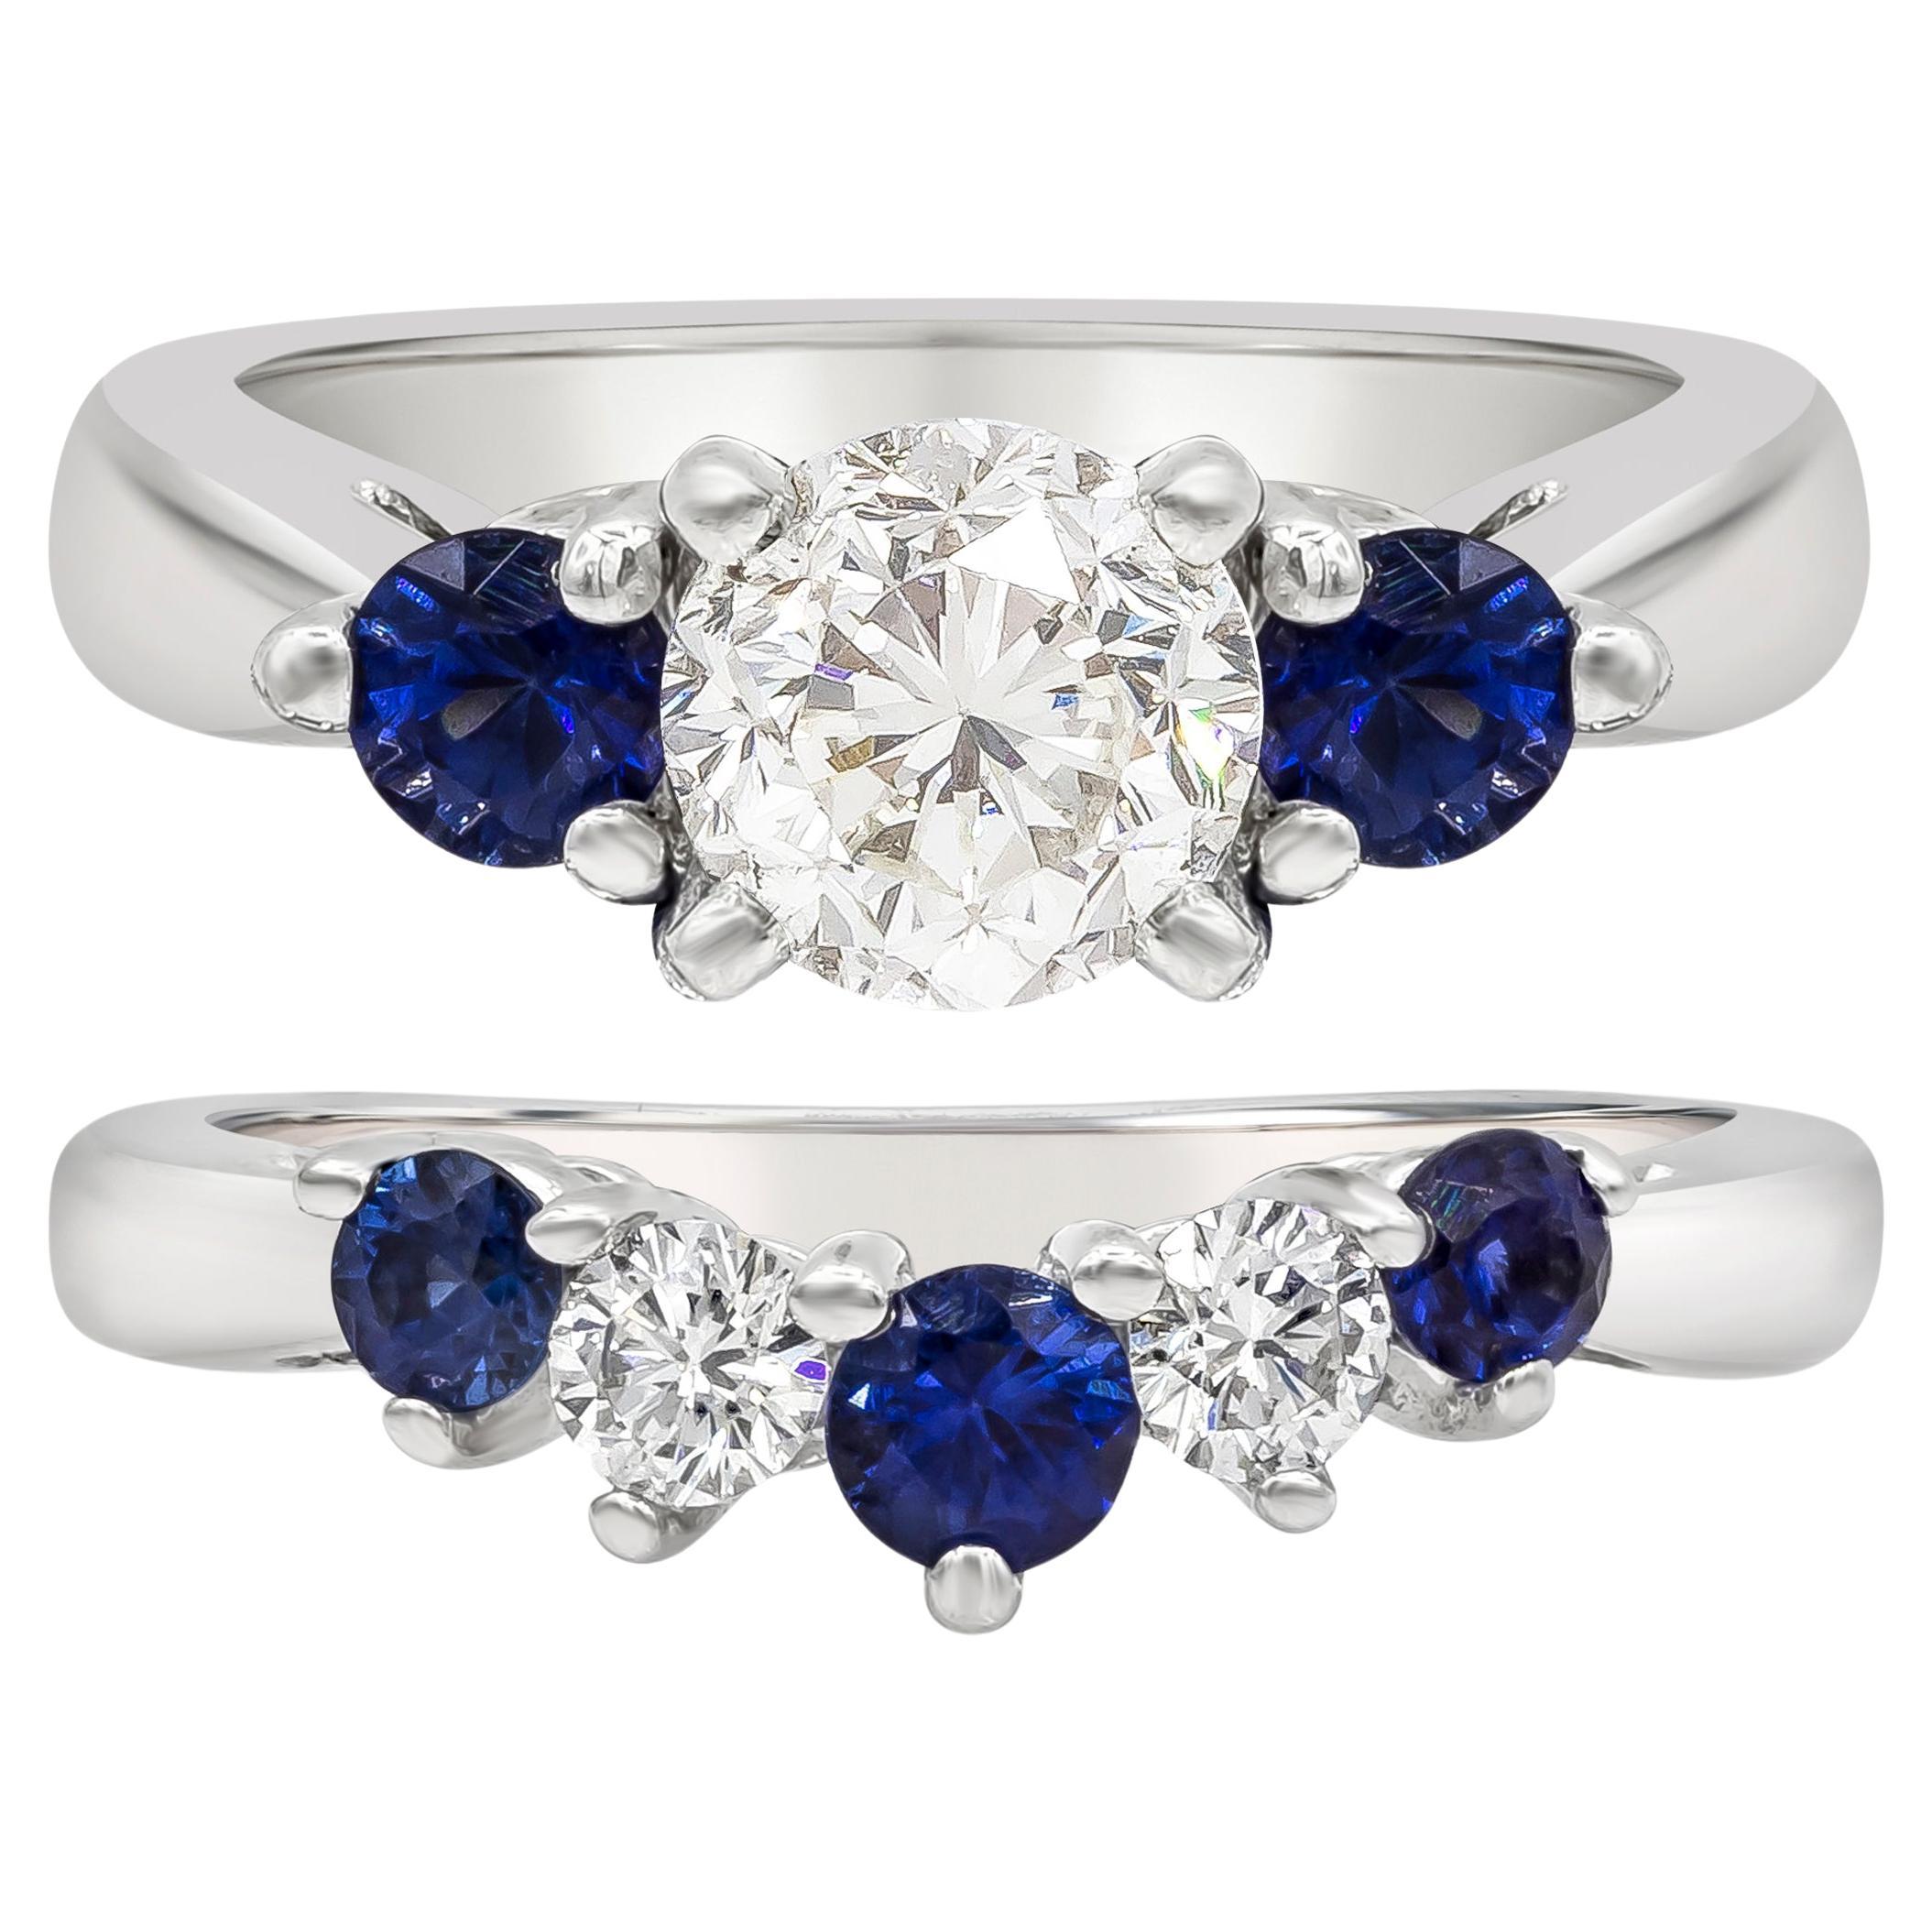 1.89 Carats Total Diamond and Blue Sapphire Wedding Band and Engagement Ring Set